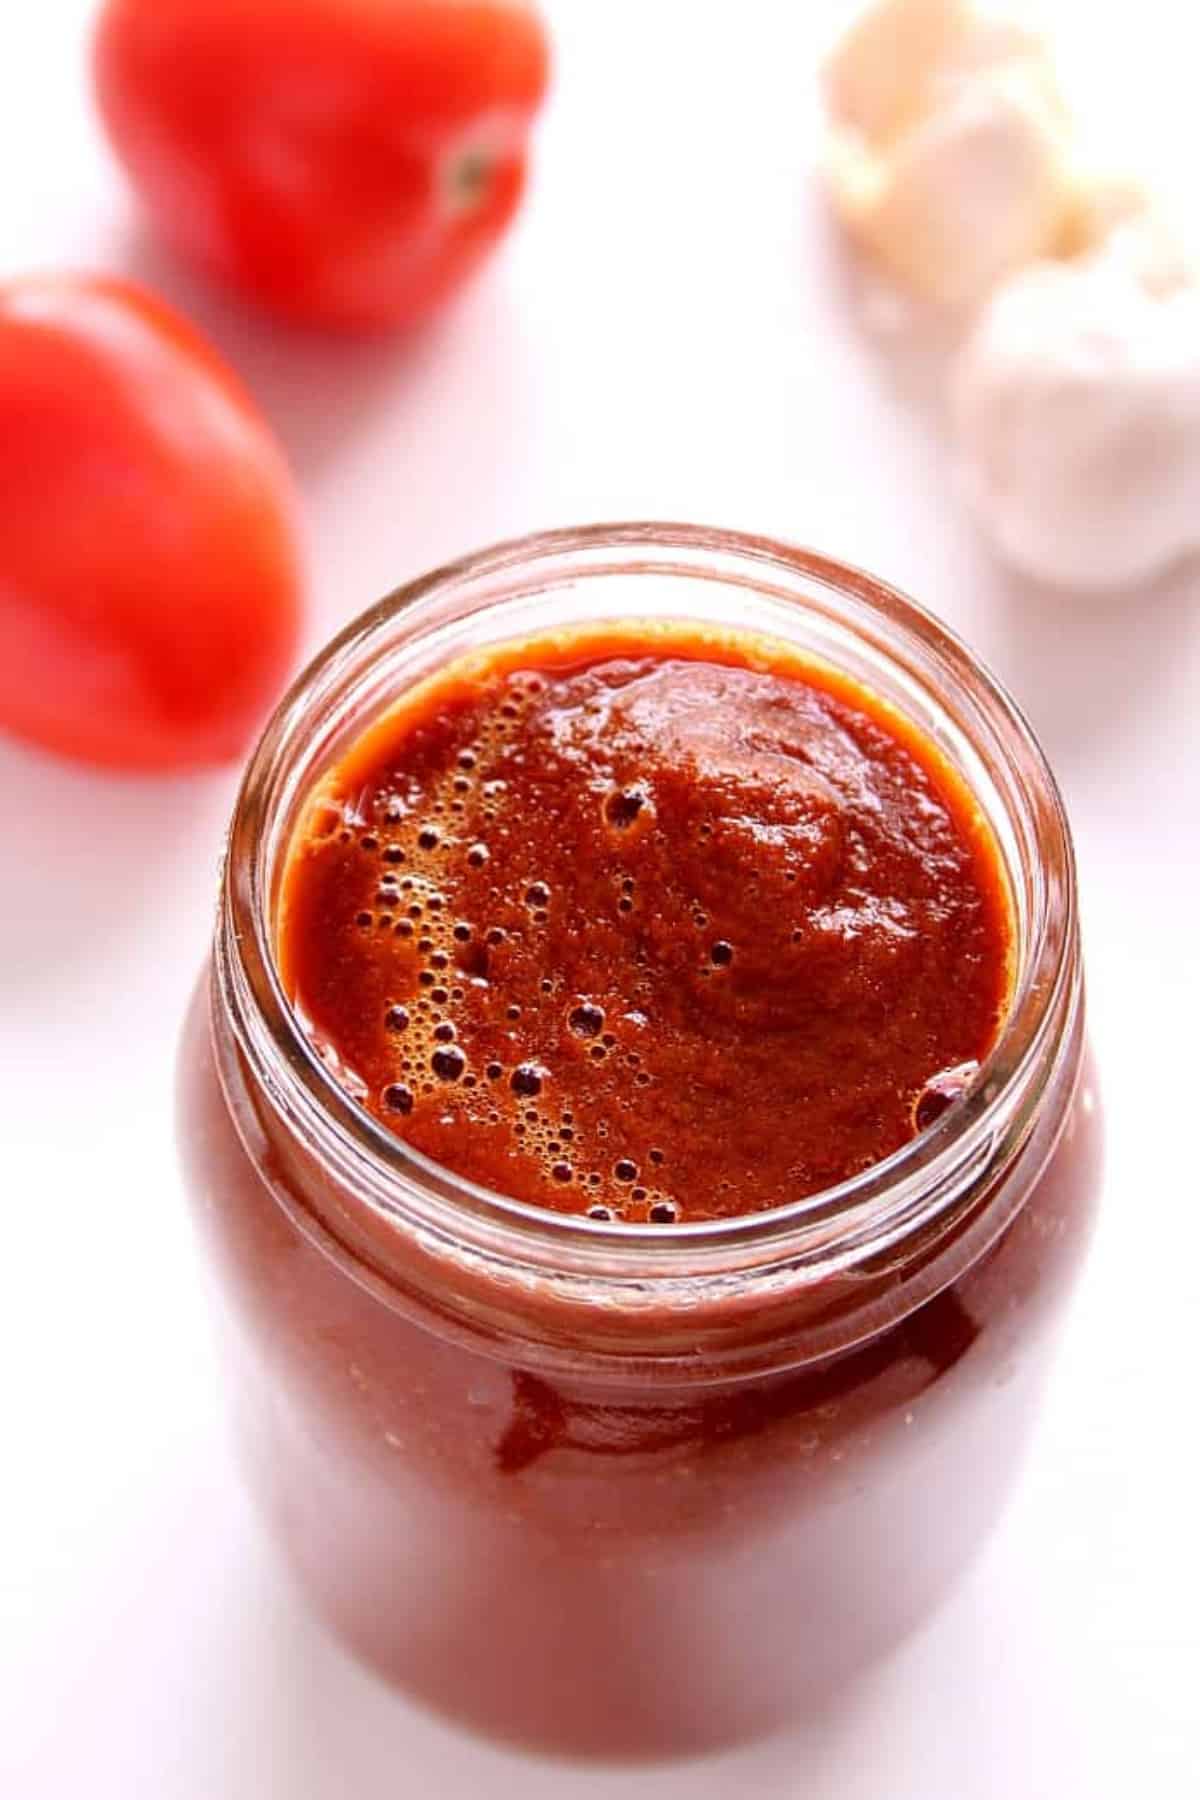 Red enchilada sauce in a glass jar on a white board with tomatoes and garlic next to it.